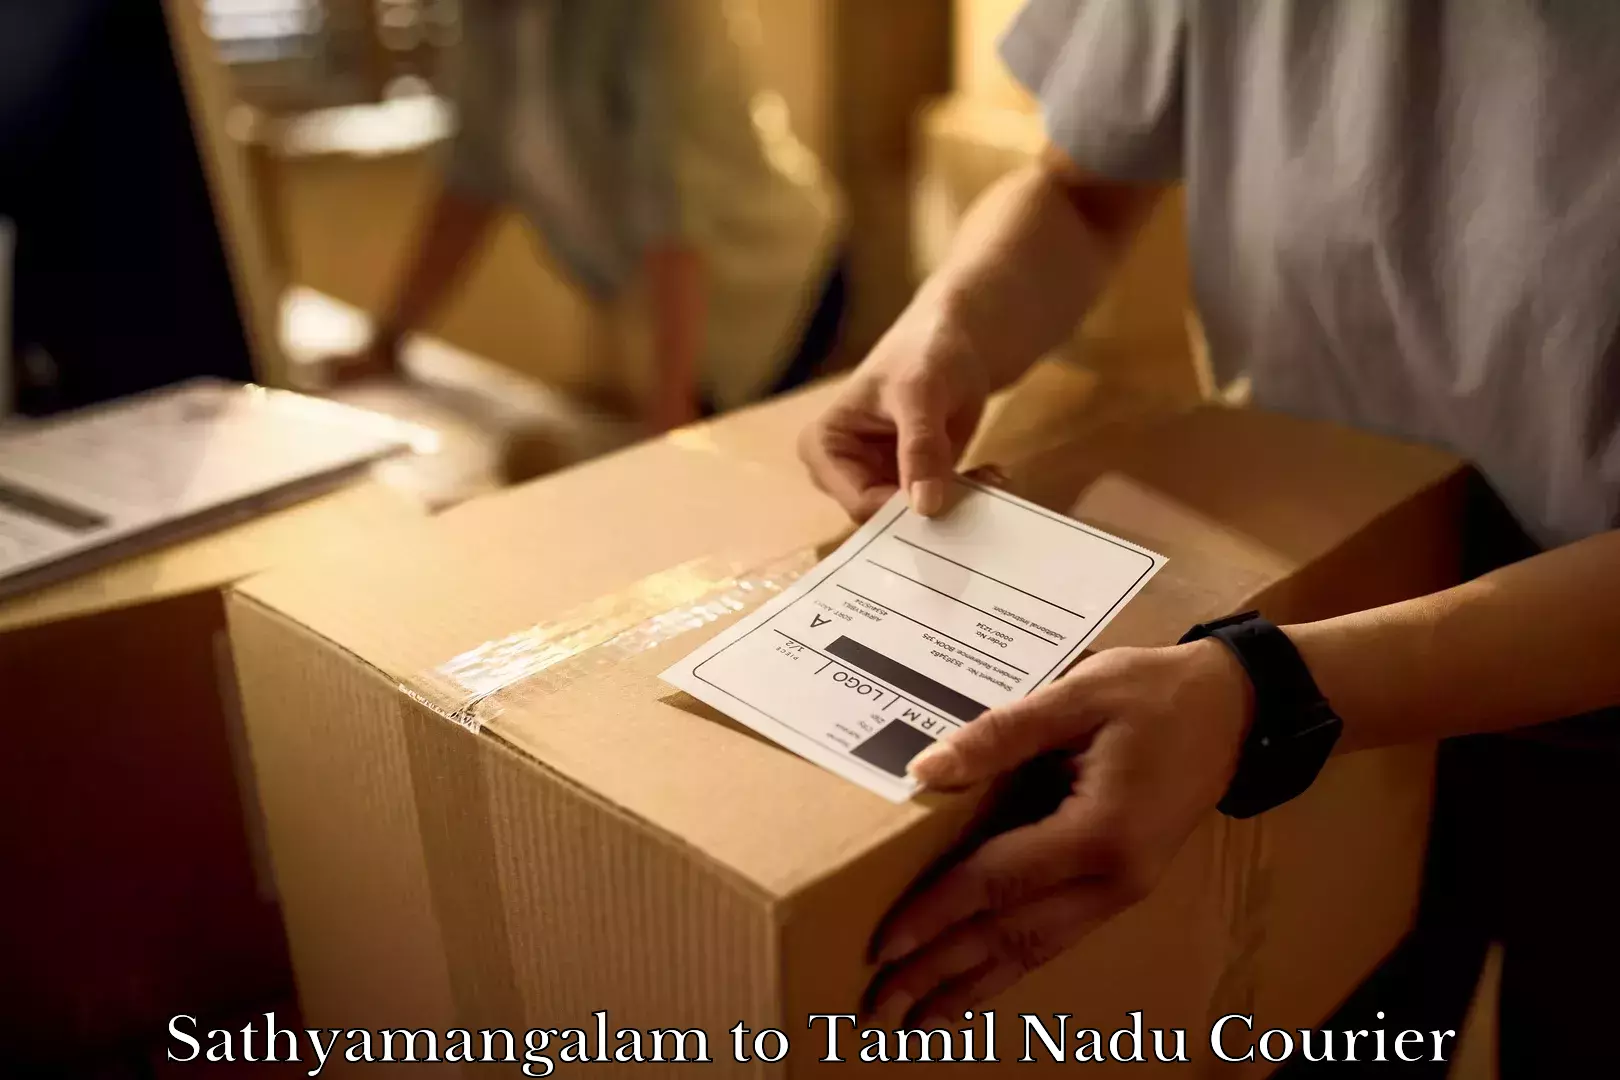 Moving service excellence Sathyamangalam to Tamil Nadu